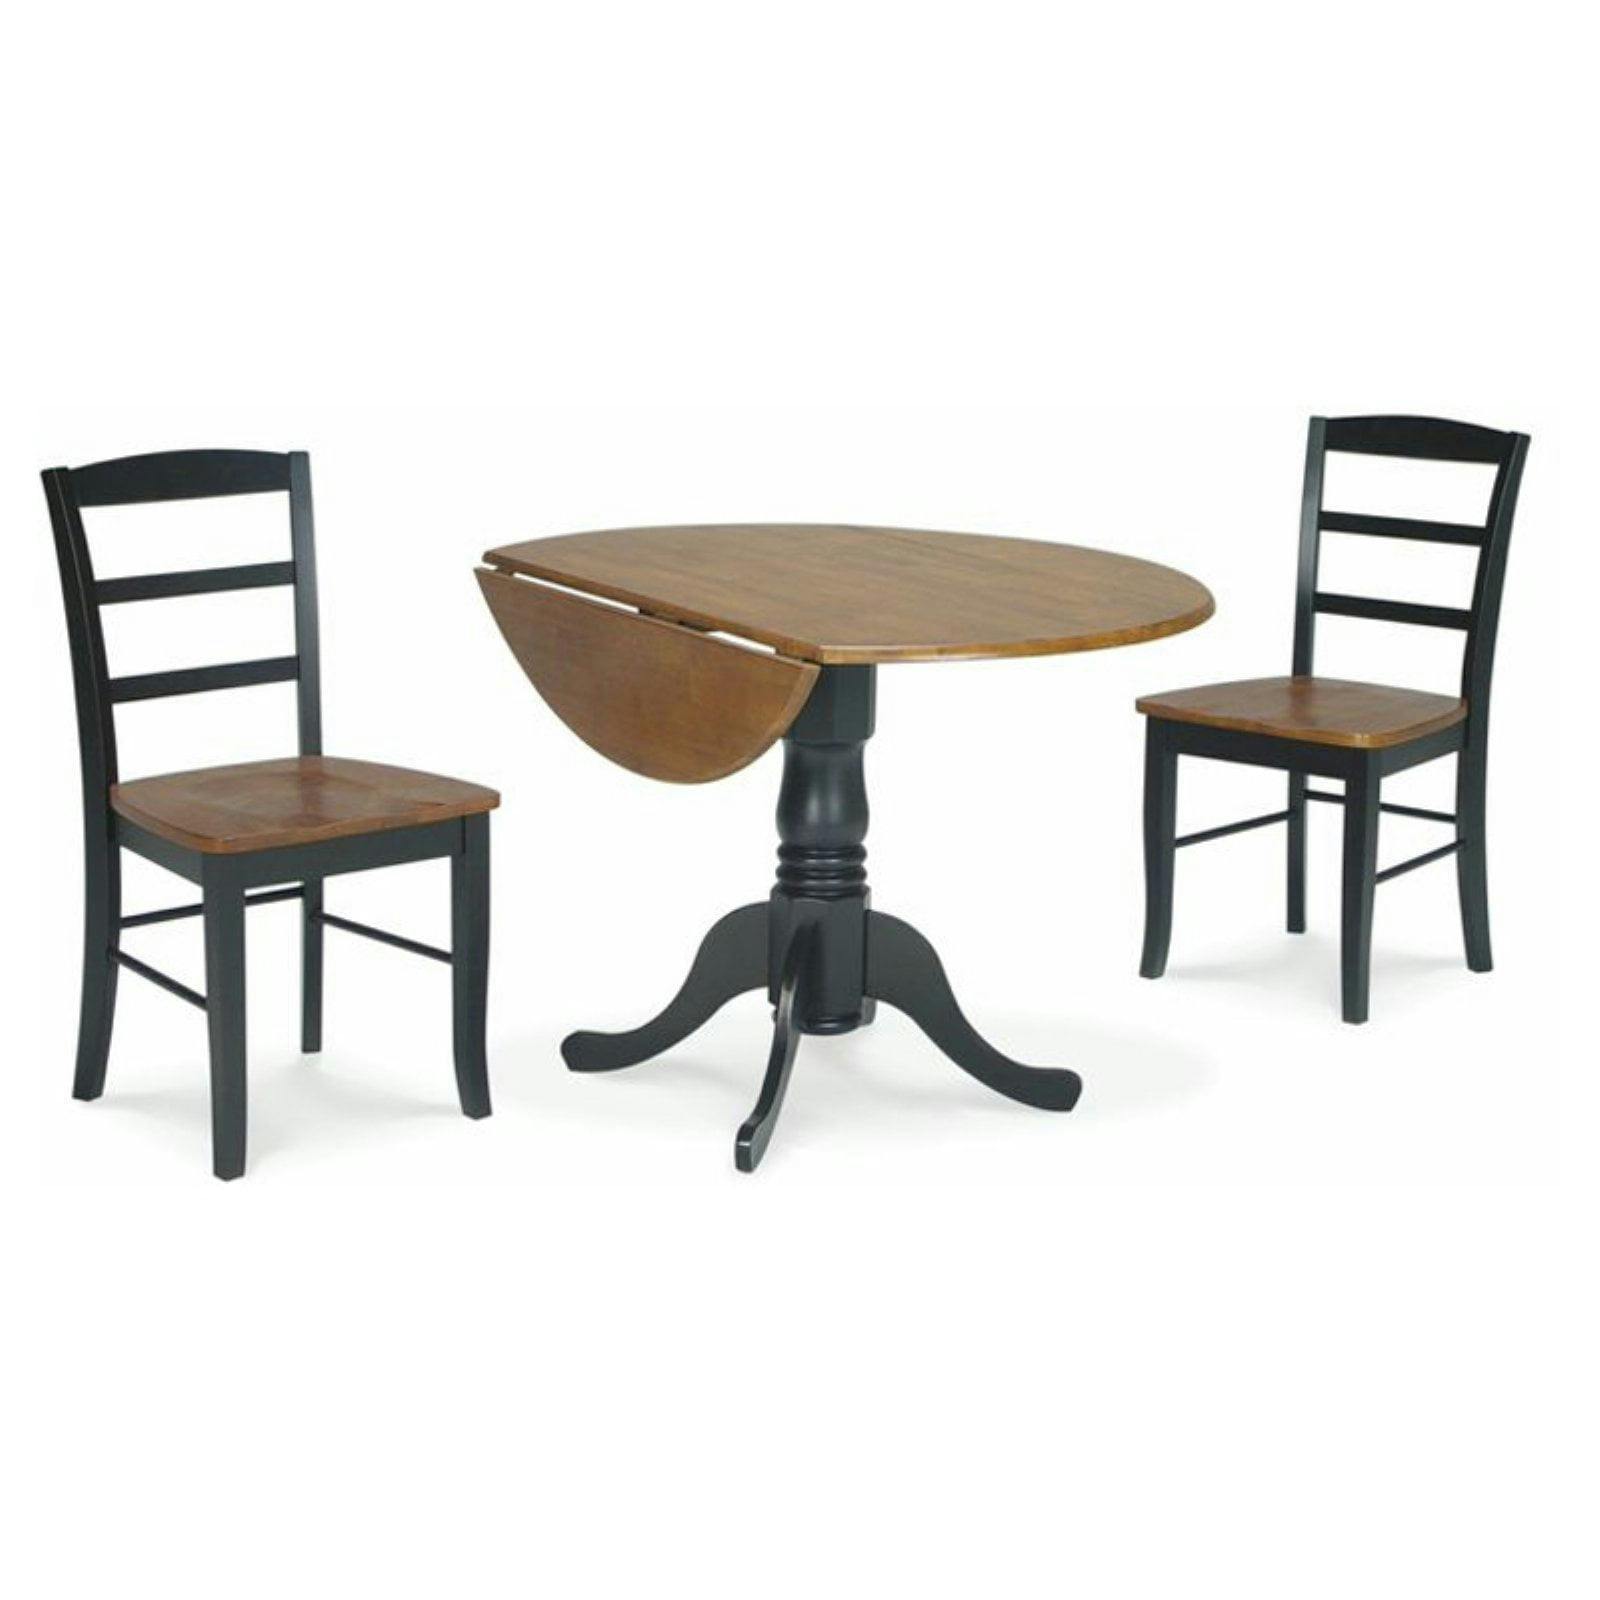 Elegant Dual-Tone Drop Leaf Dining Set with Ladder Back Chairs